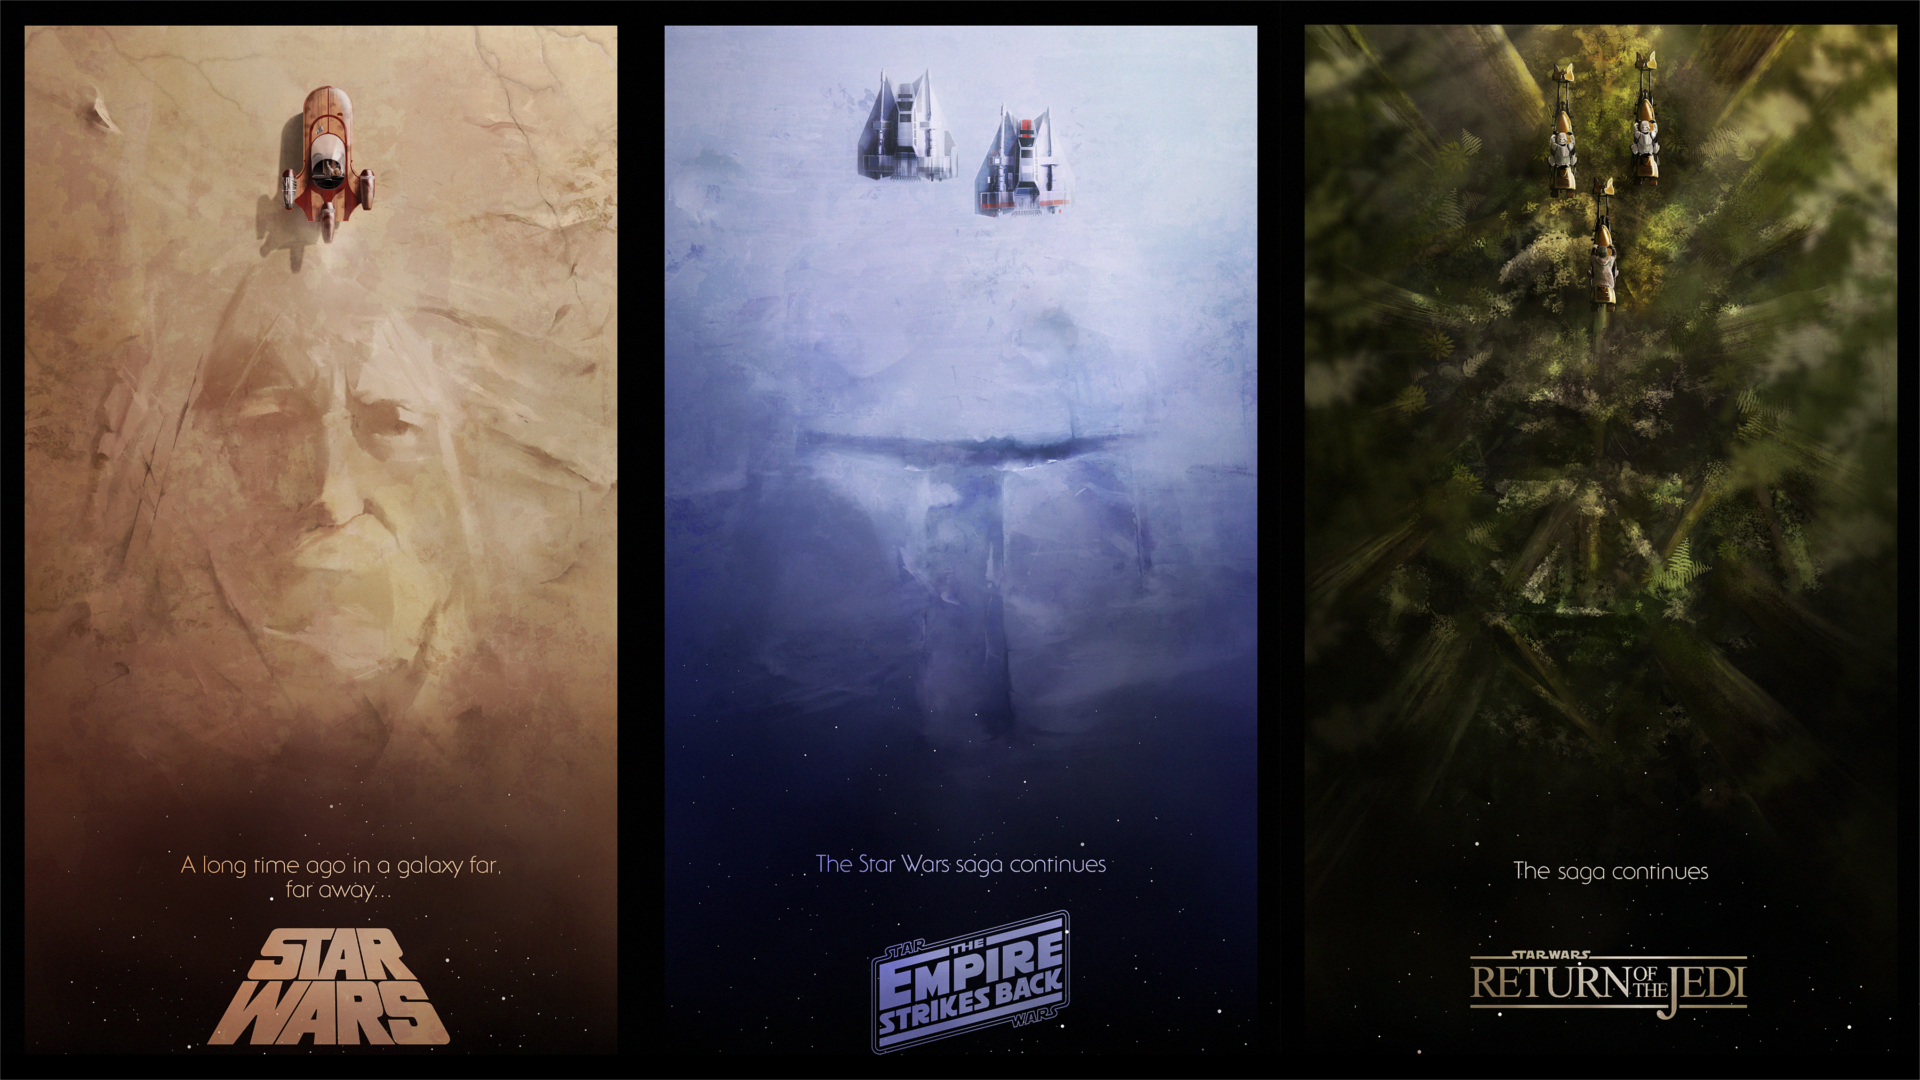 I made a wallpaper of three fan made Star Wars posters